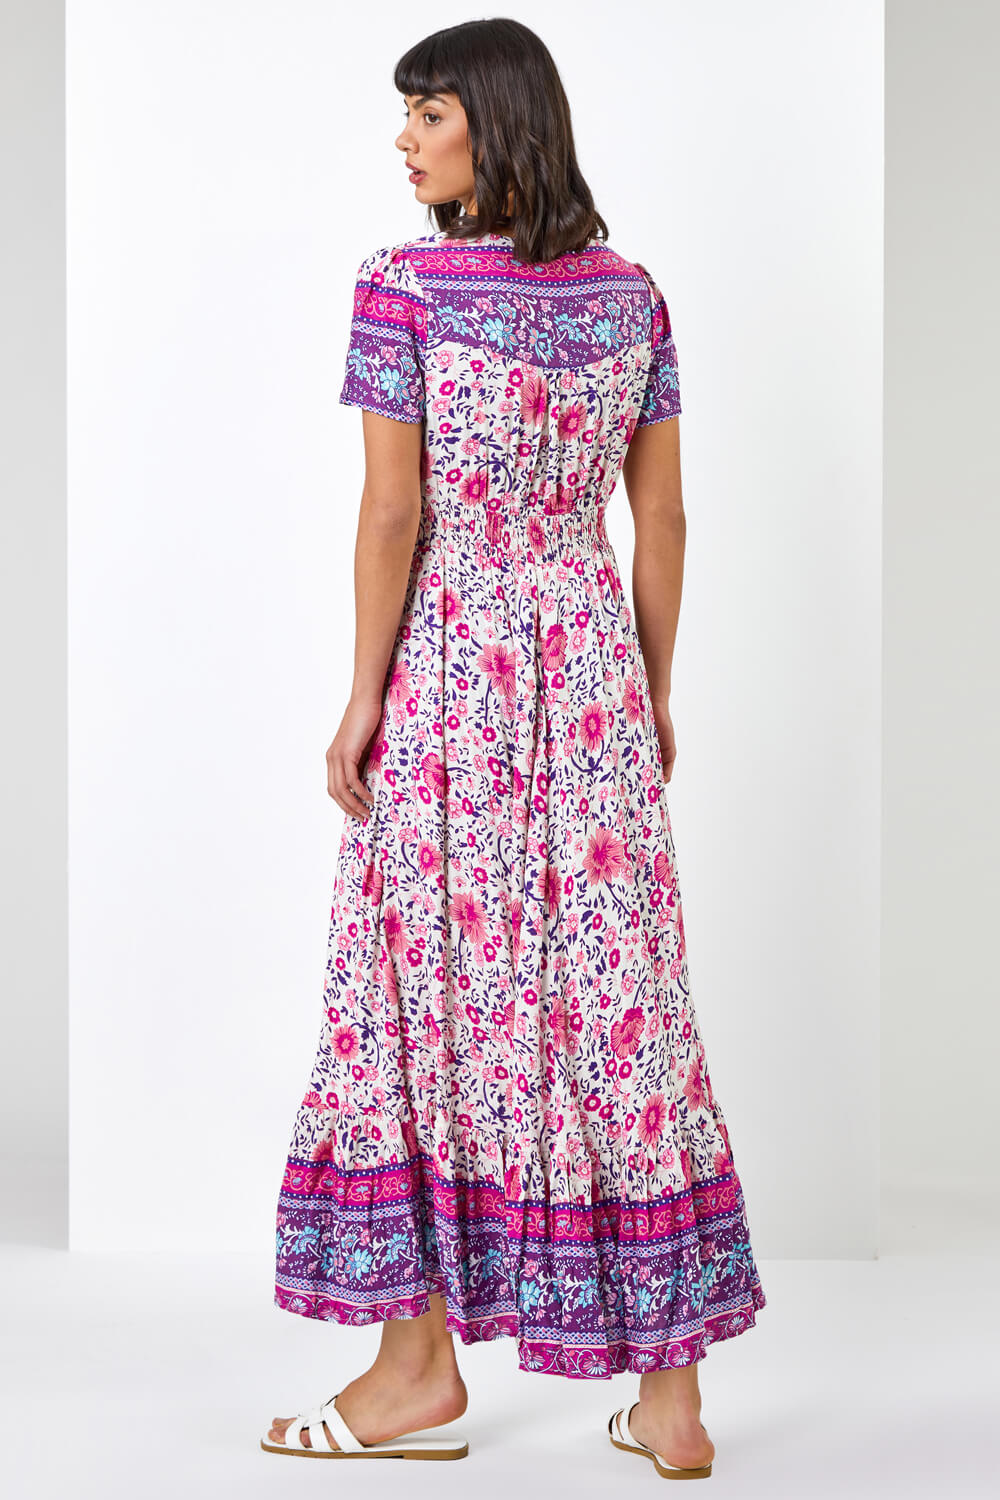 PINK Floral Shirred Waist Maxi Dress, Image 2 of 5